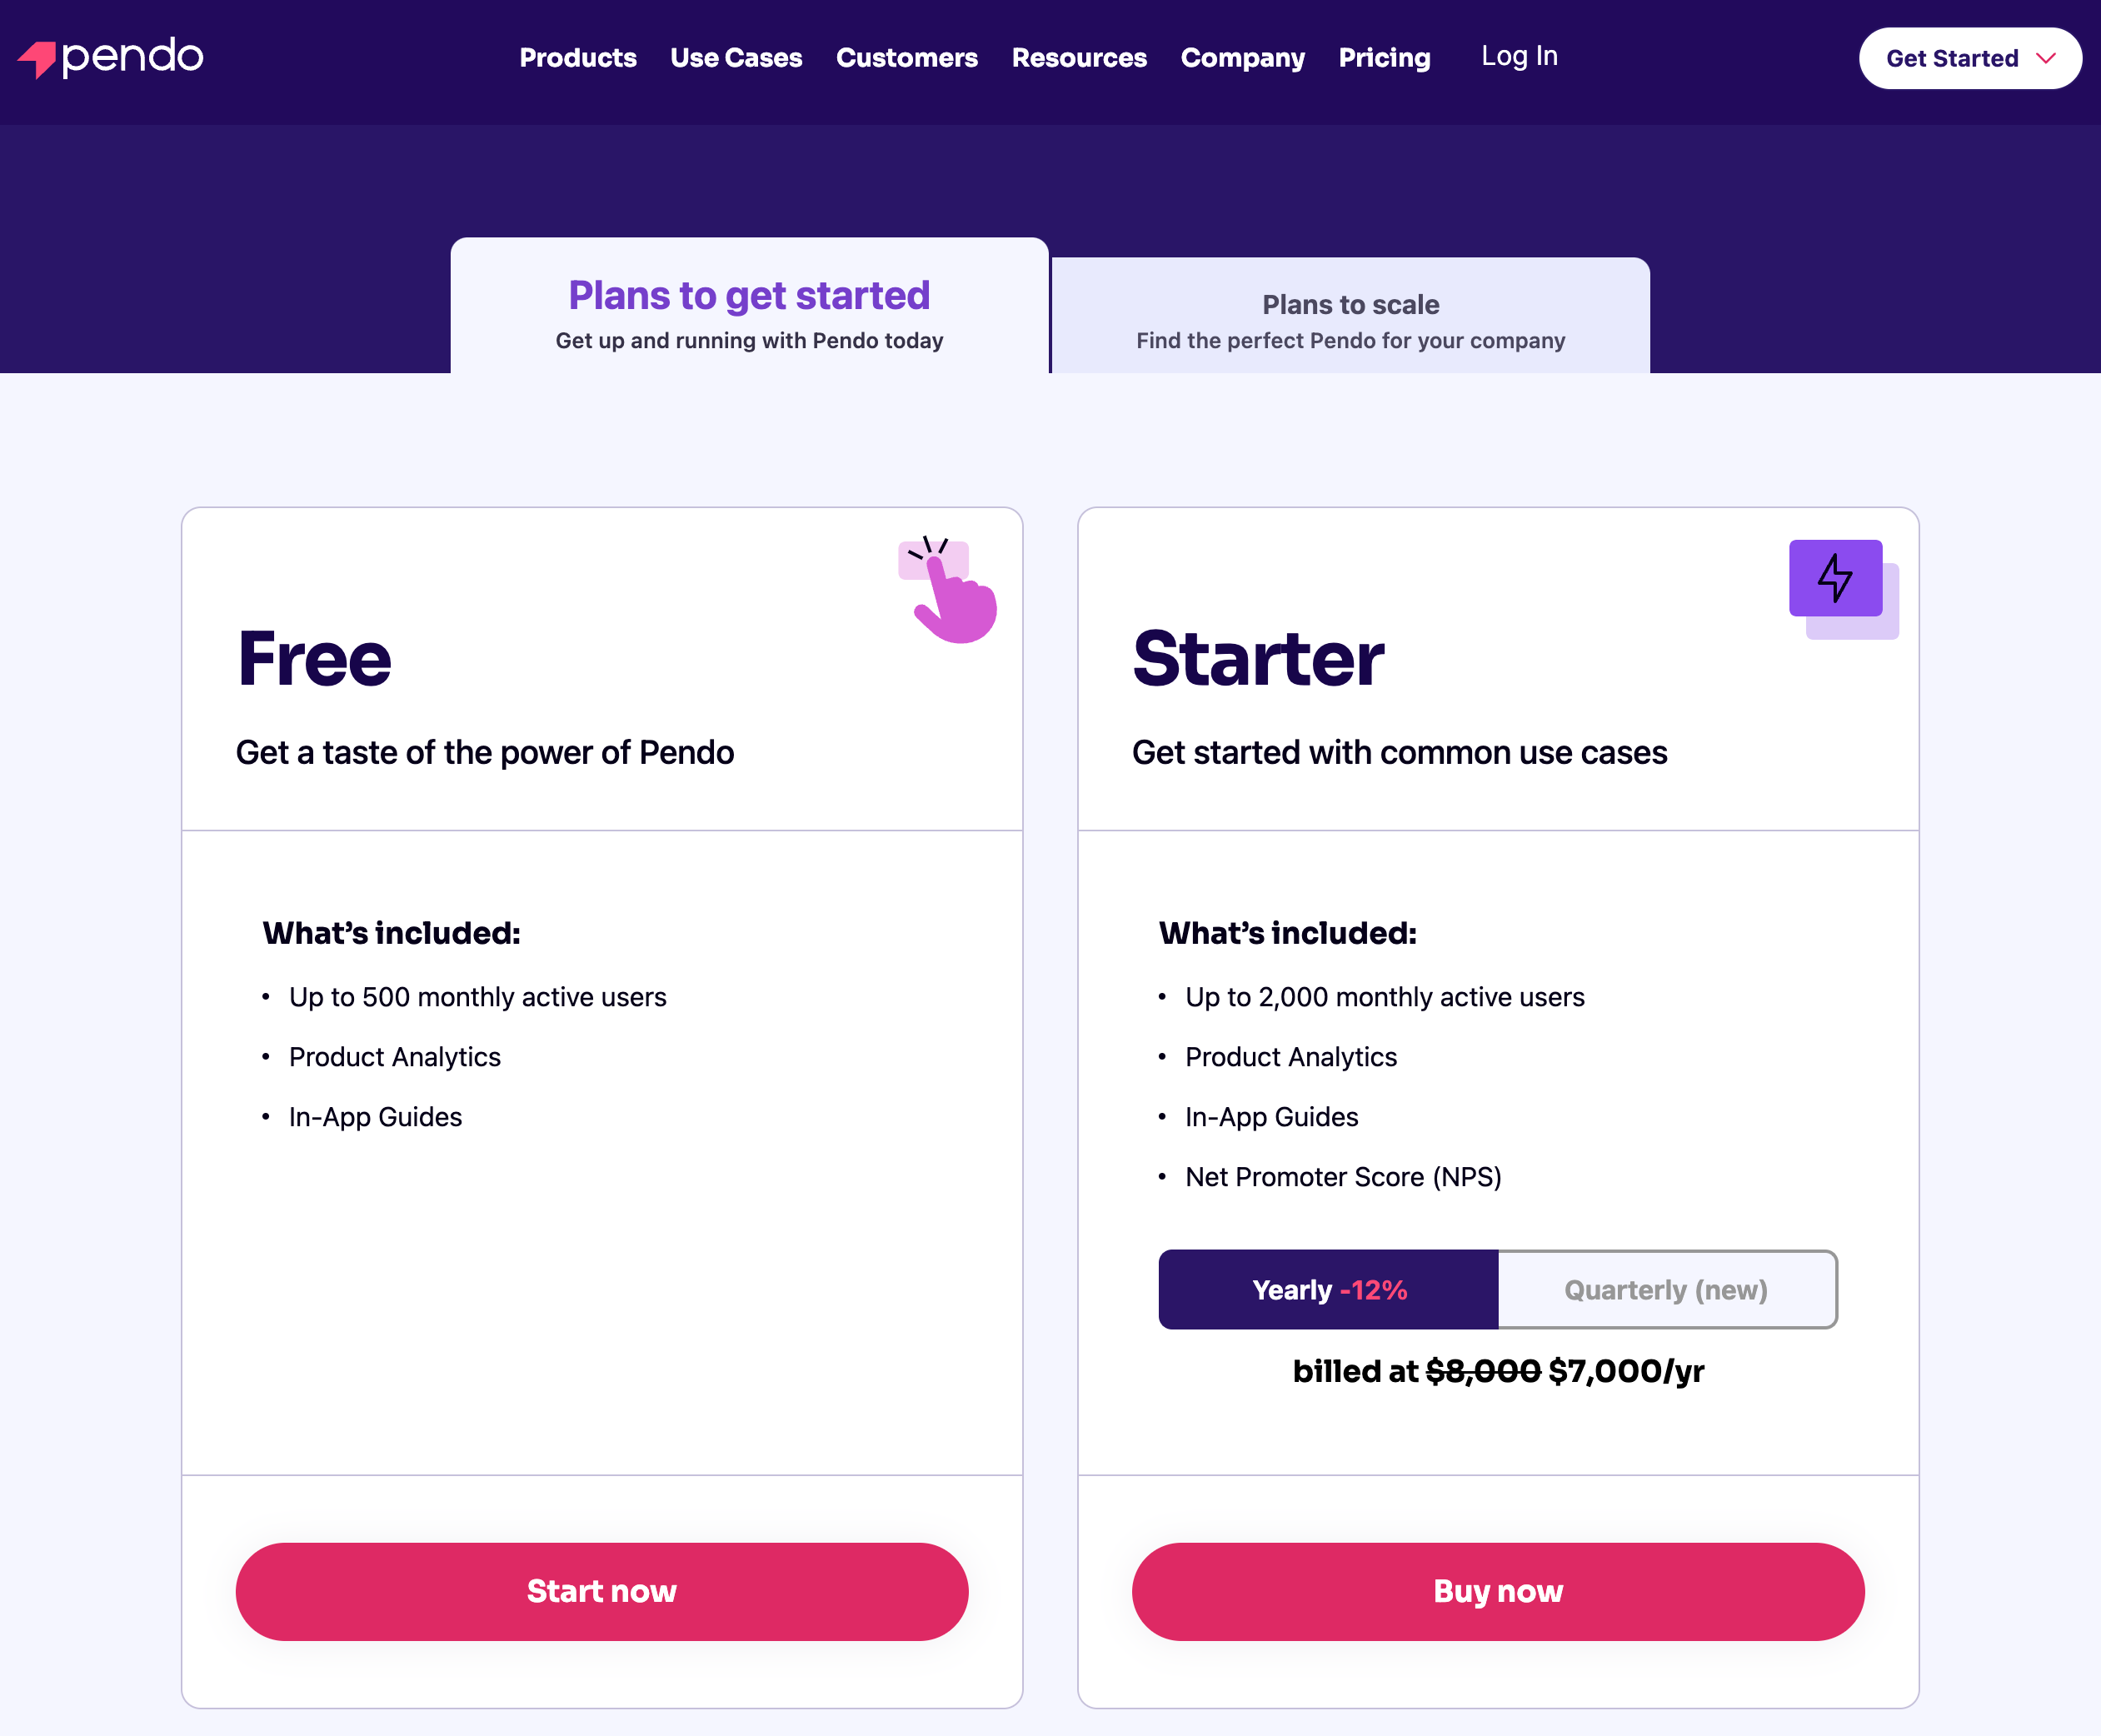 pendo pricing plans free and starter